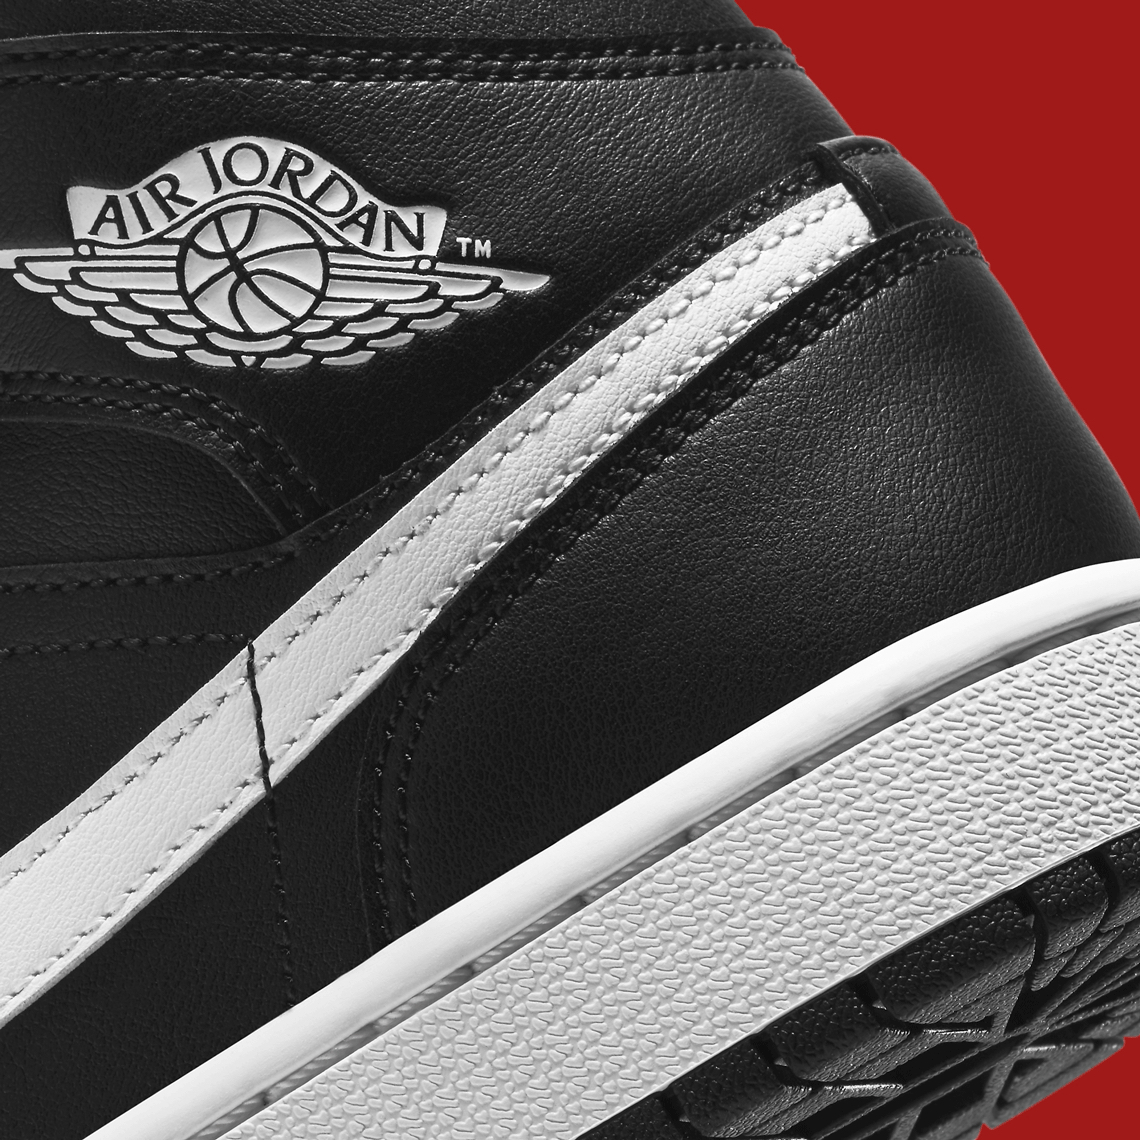 The Air Jordan 1 Mid Appears In Simple “Black/White” Reminiscent Of ...